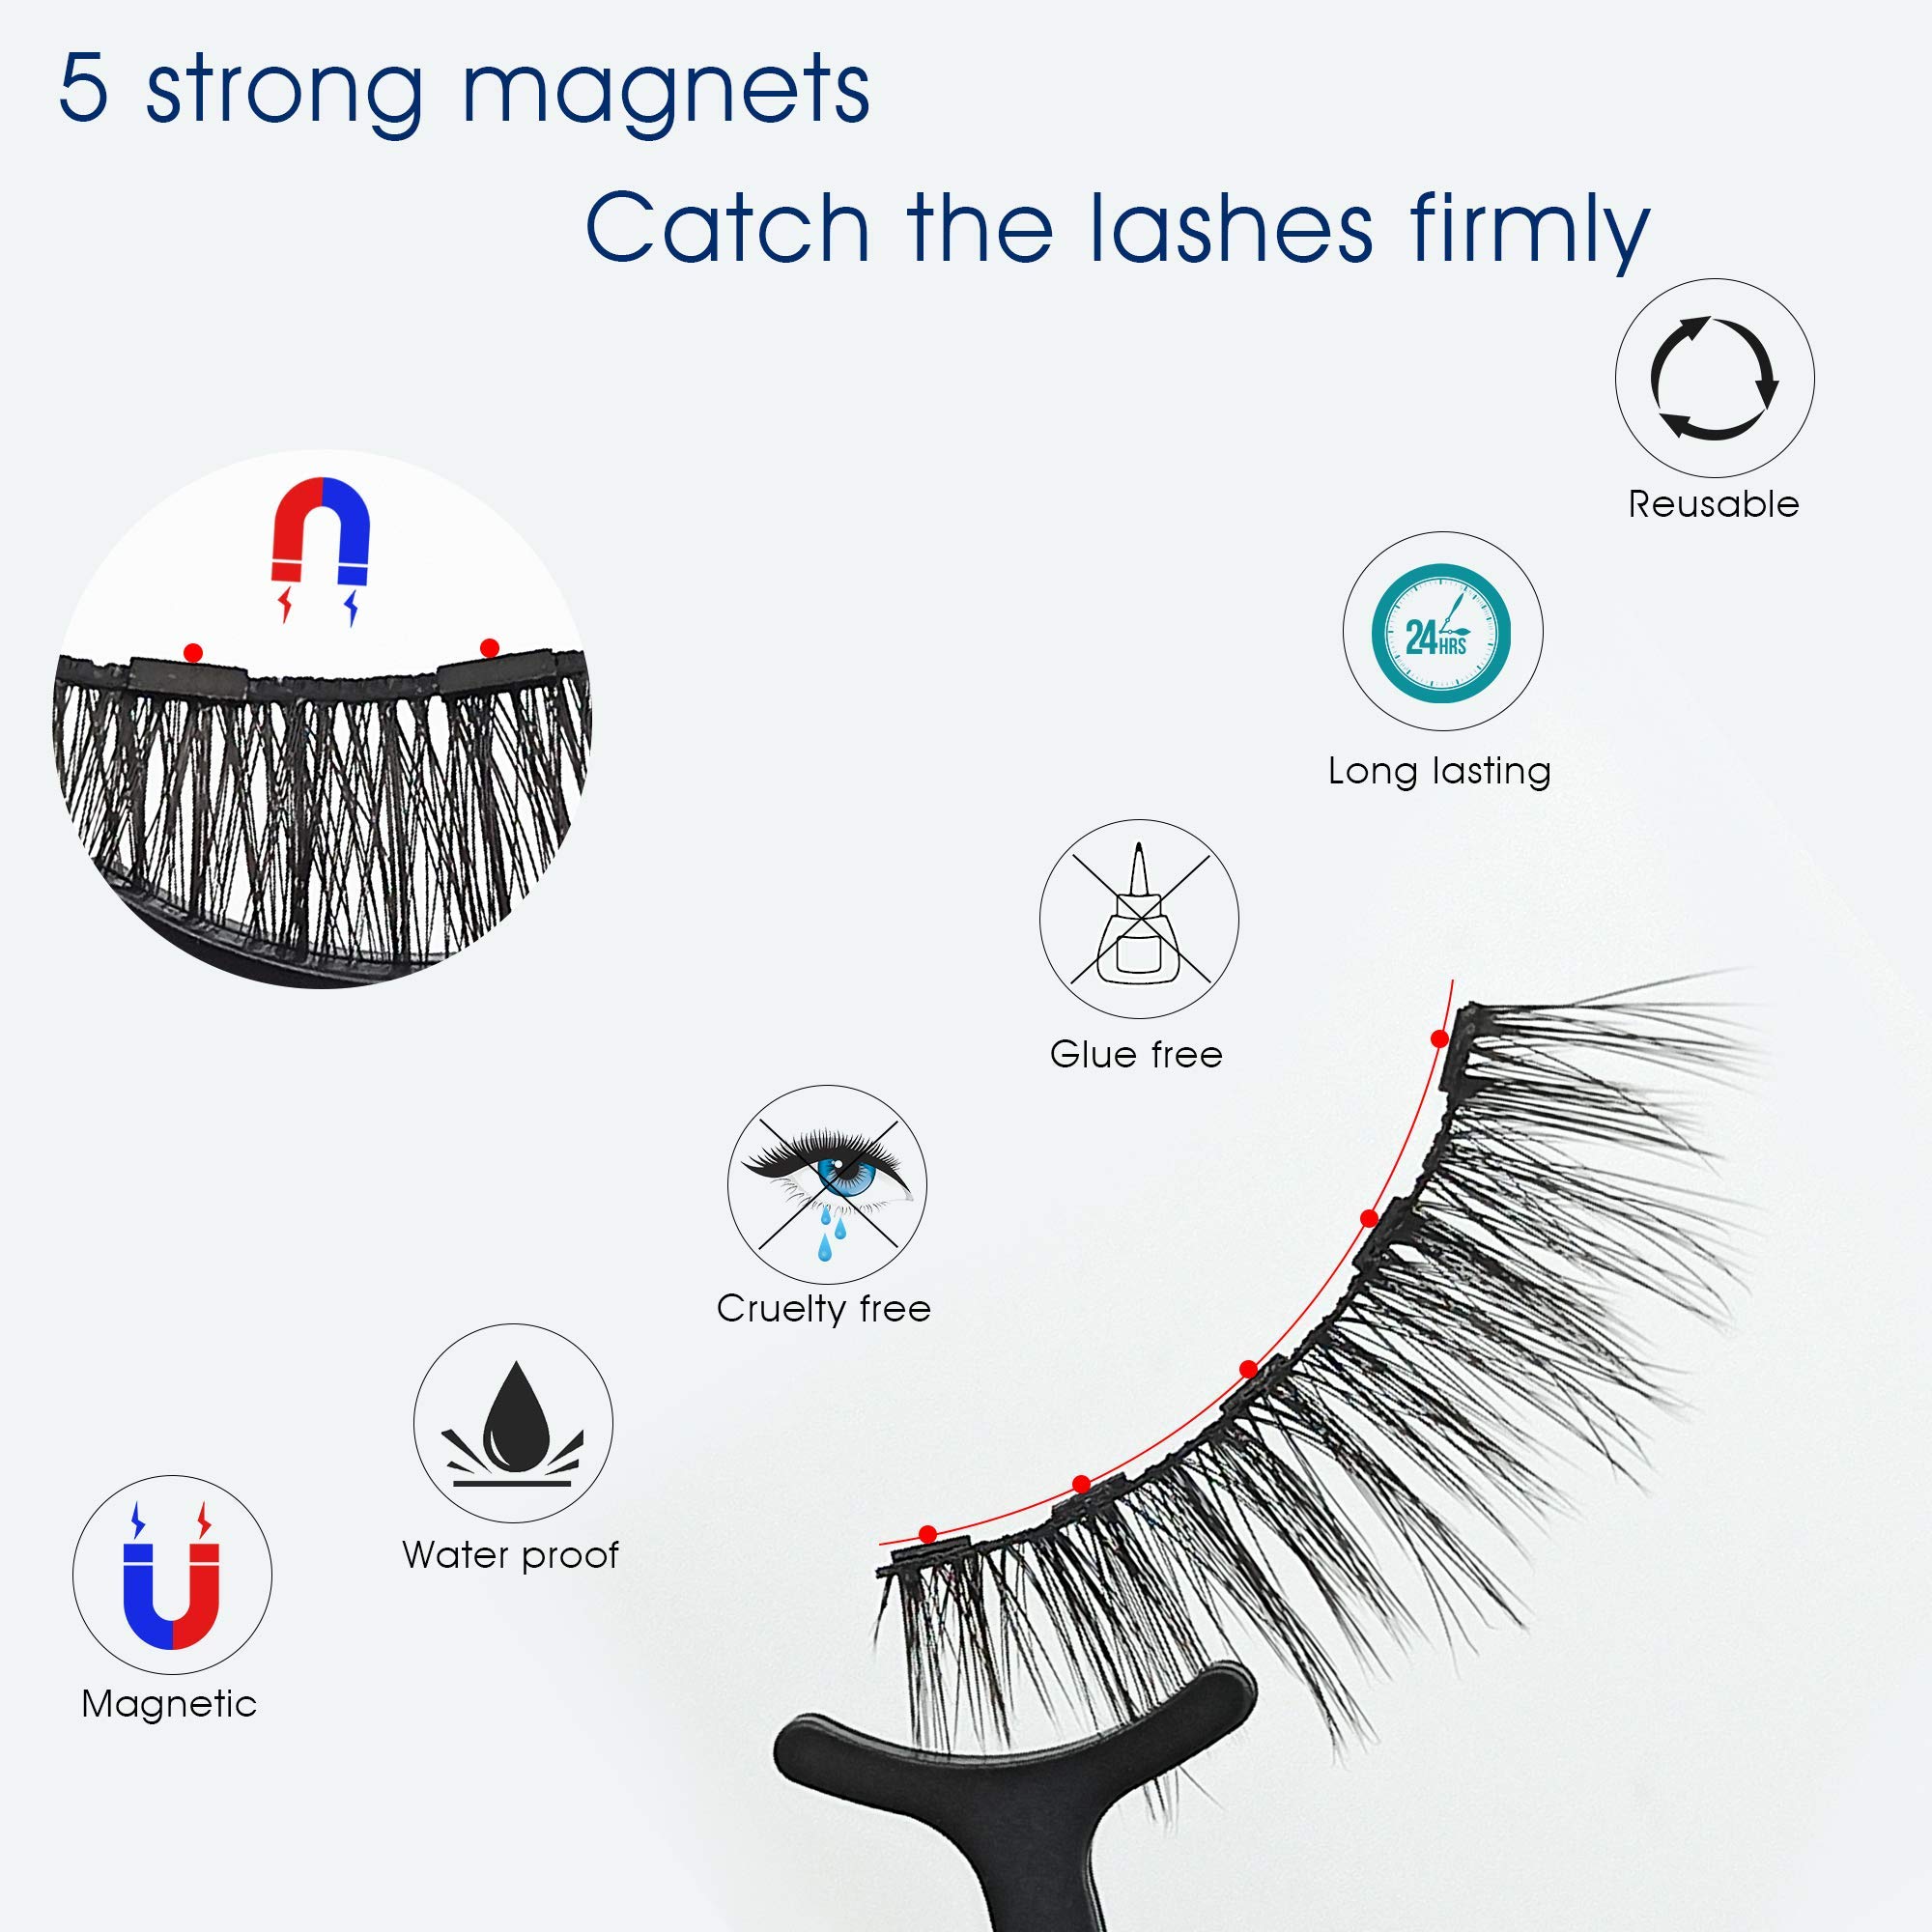 Alcastar Magnetic Eyelashes with Eyeliner Kit,Magnetic Lashes with Eyeliner Set, Magnetic Lashes with Applicator, Reusable Magnet Lash Set,Natural Look,Cruelty-Free